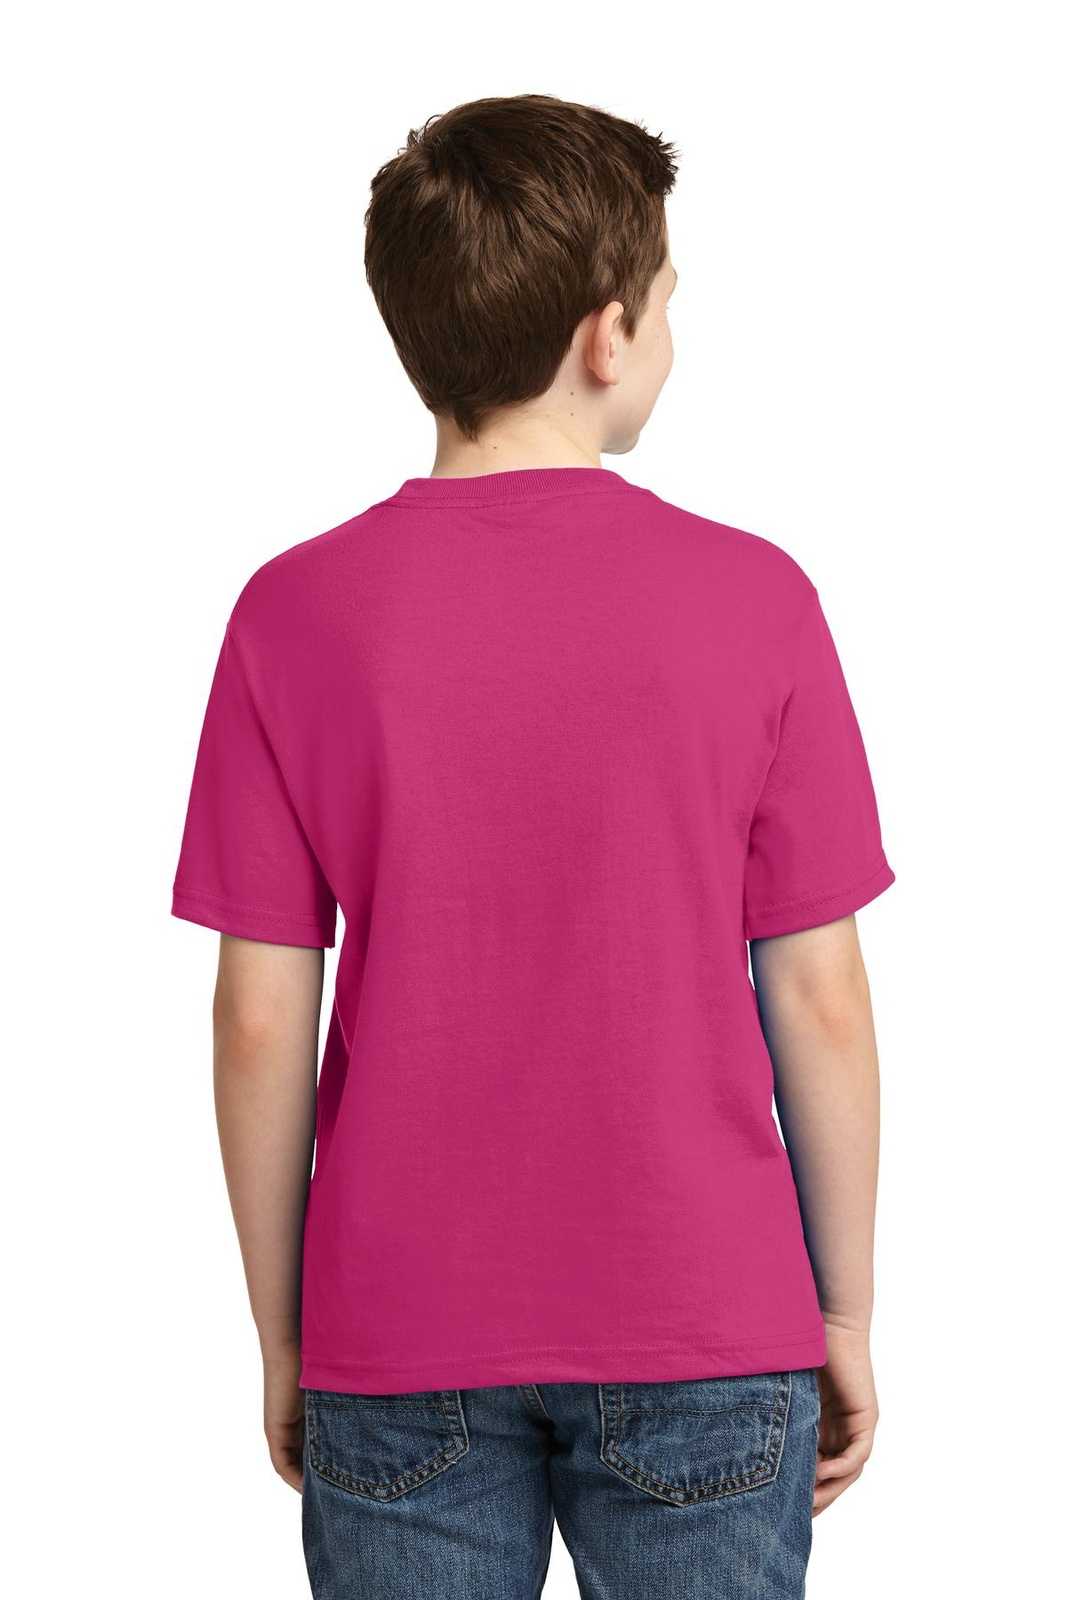 Jerzees 29B Youth Dri-Power 50/50 Cotton/Poly T-Shirt - Cyber Pink - HIT a Double